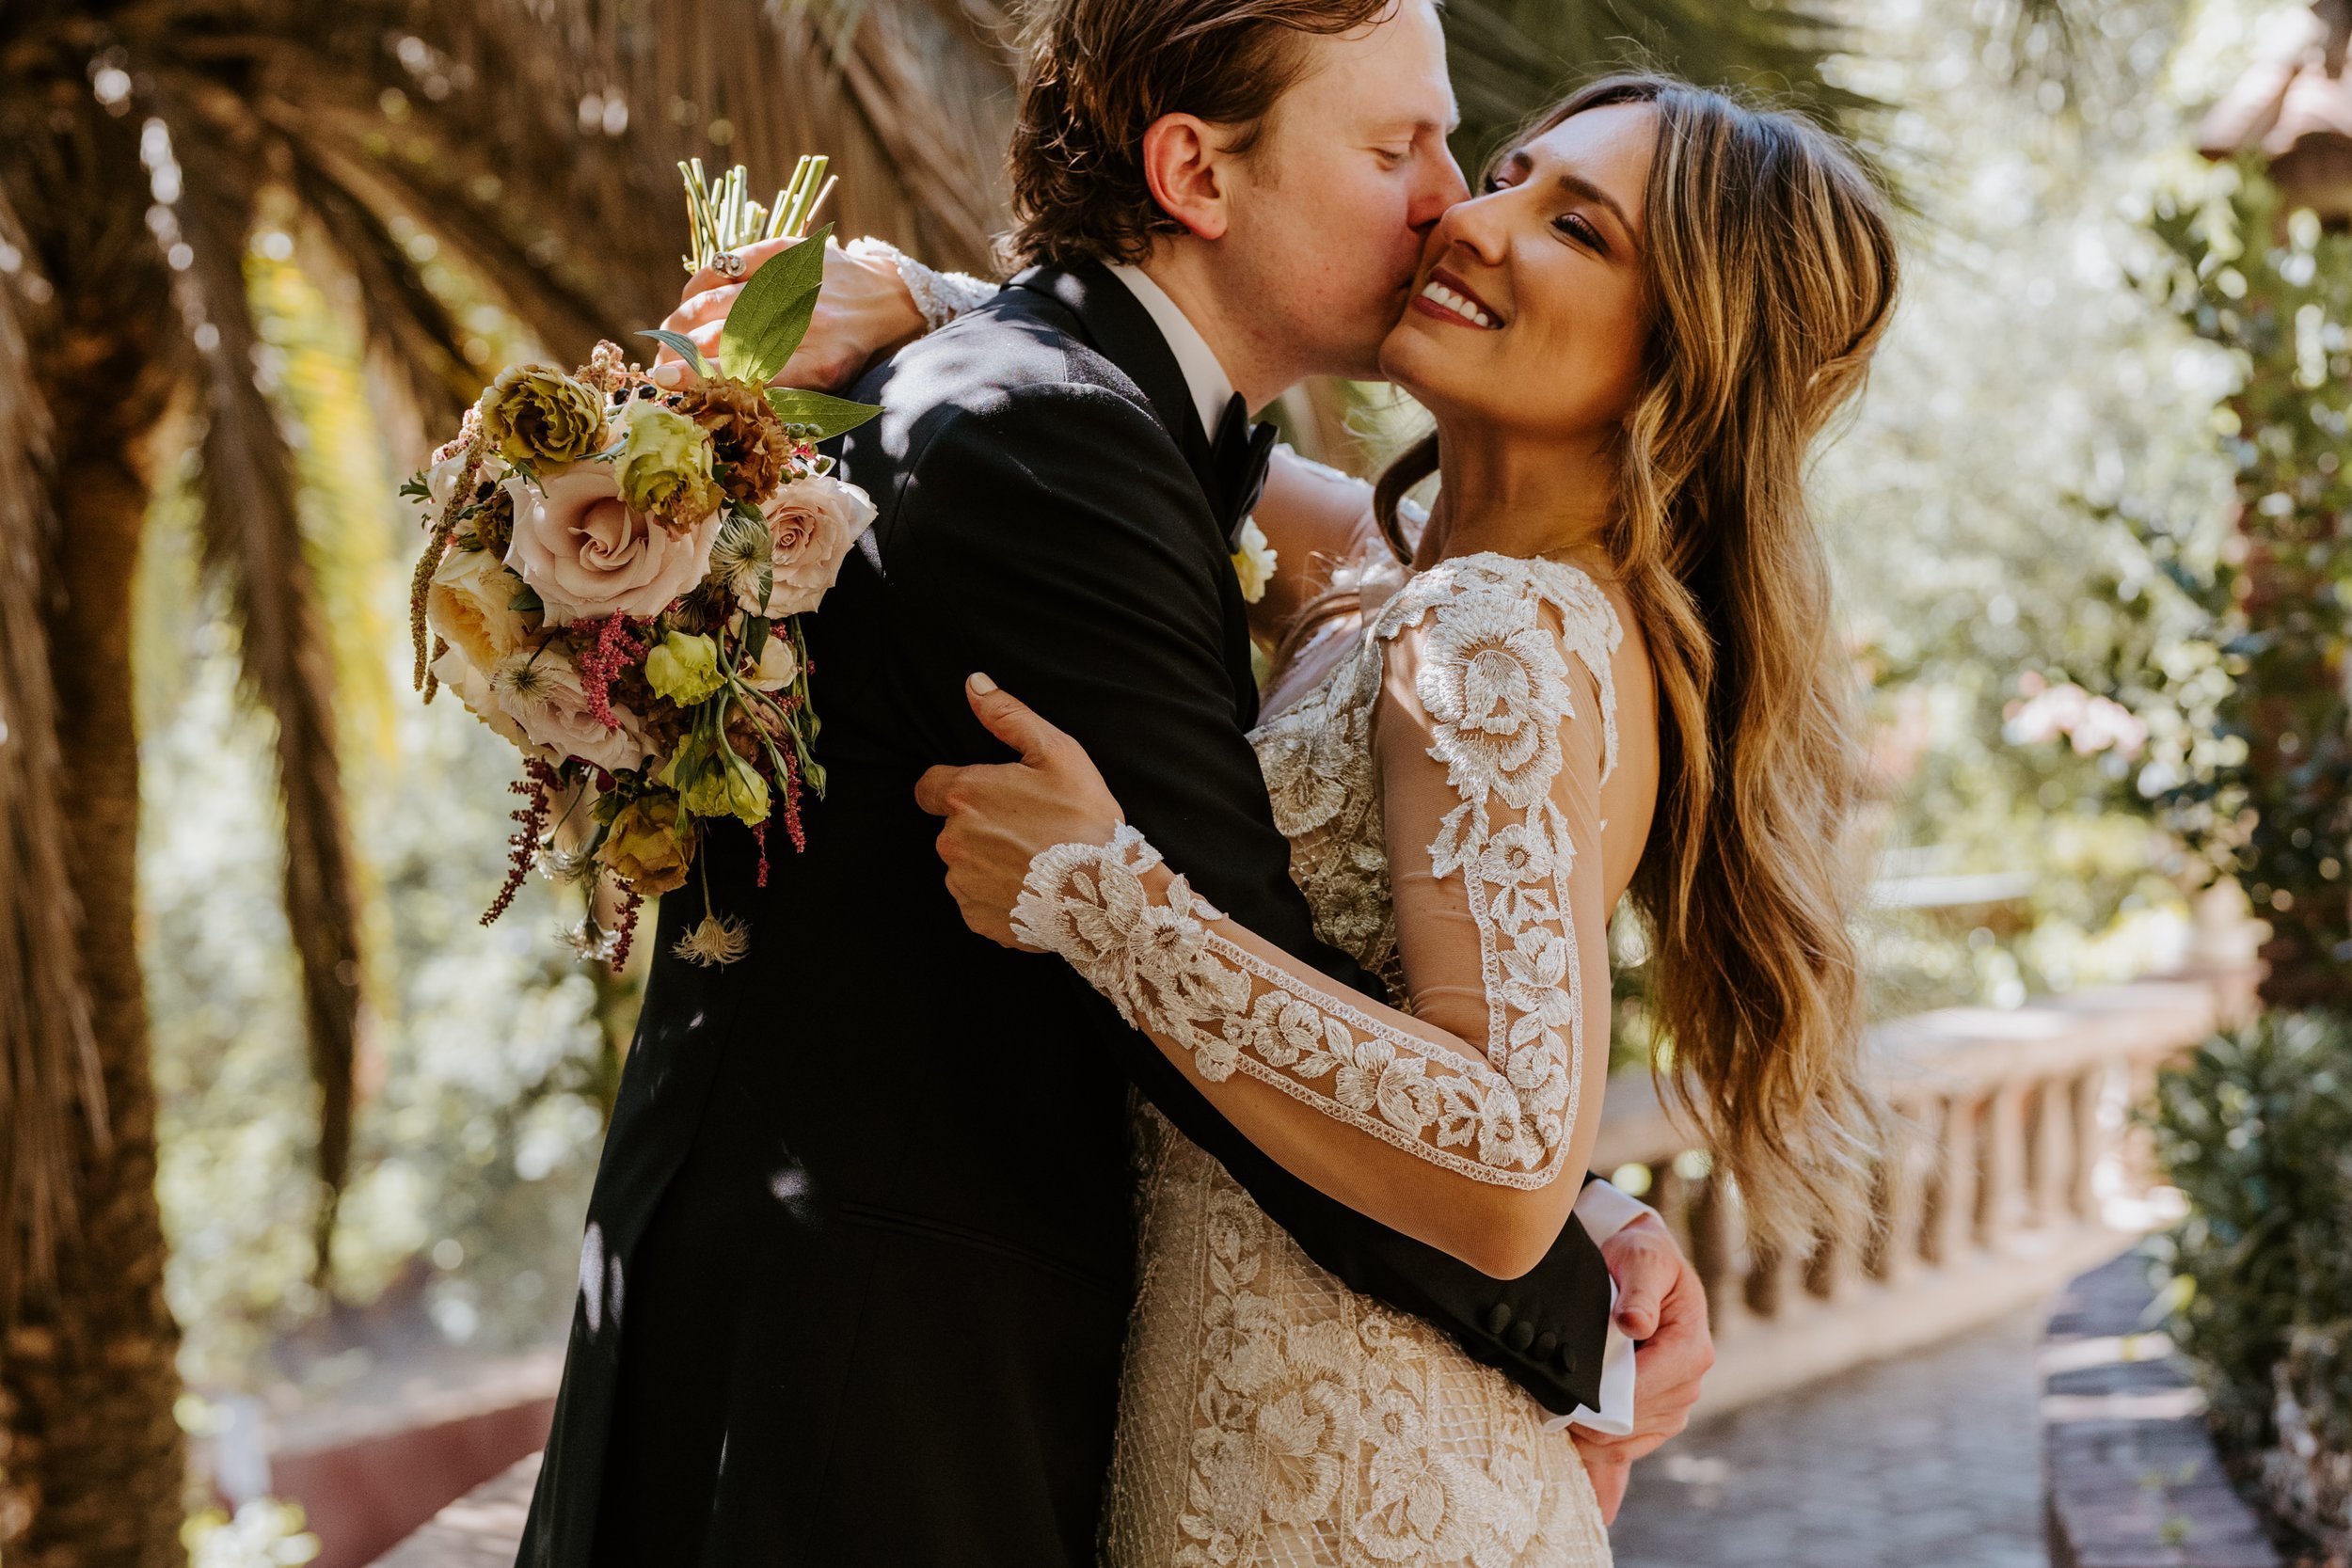 Bride and groom portrait at The Houdini Estate wedding in los angeles, ca. Vibrant and candid los angeles wedding photography by Tida Svy